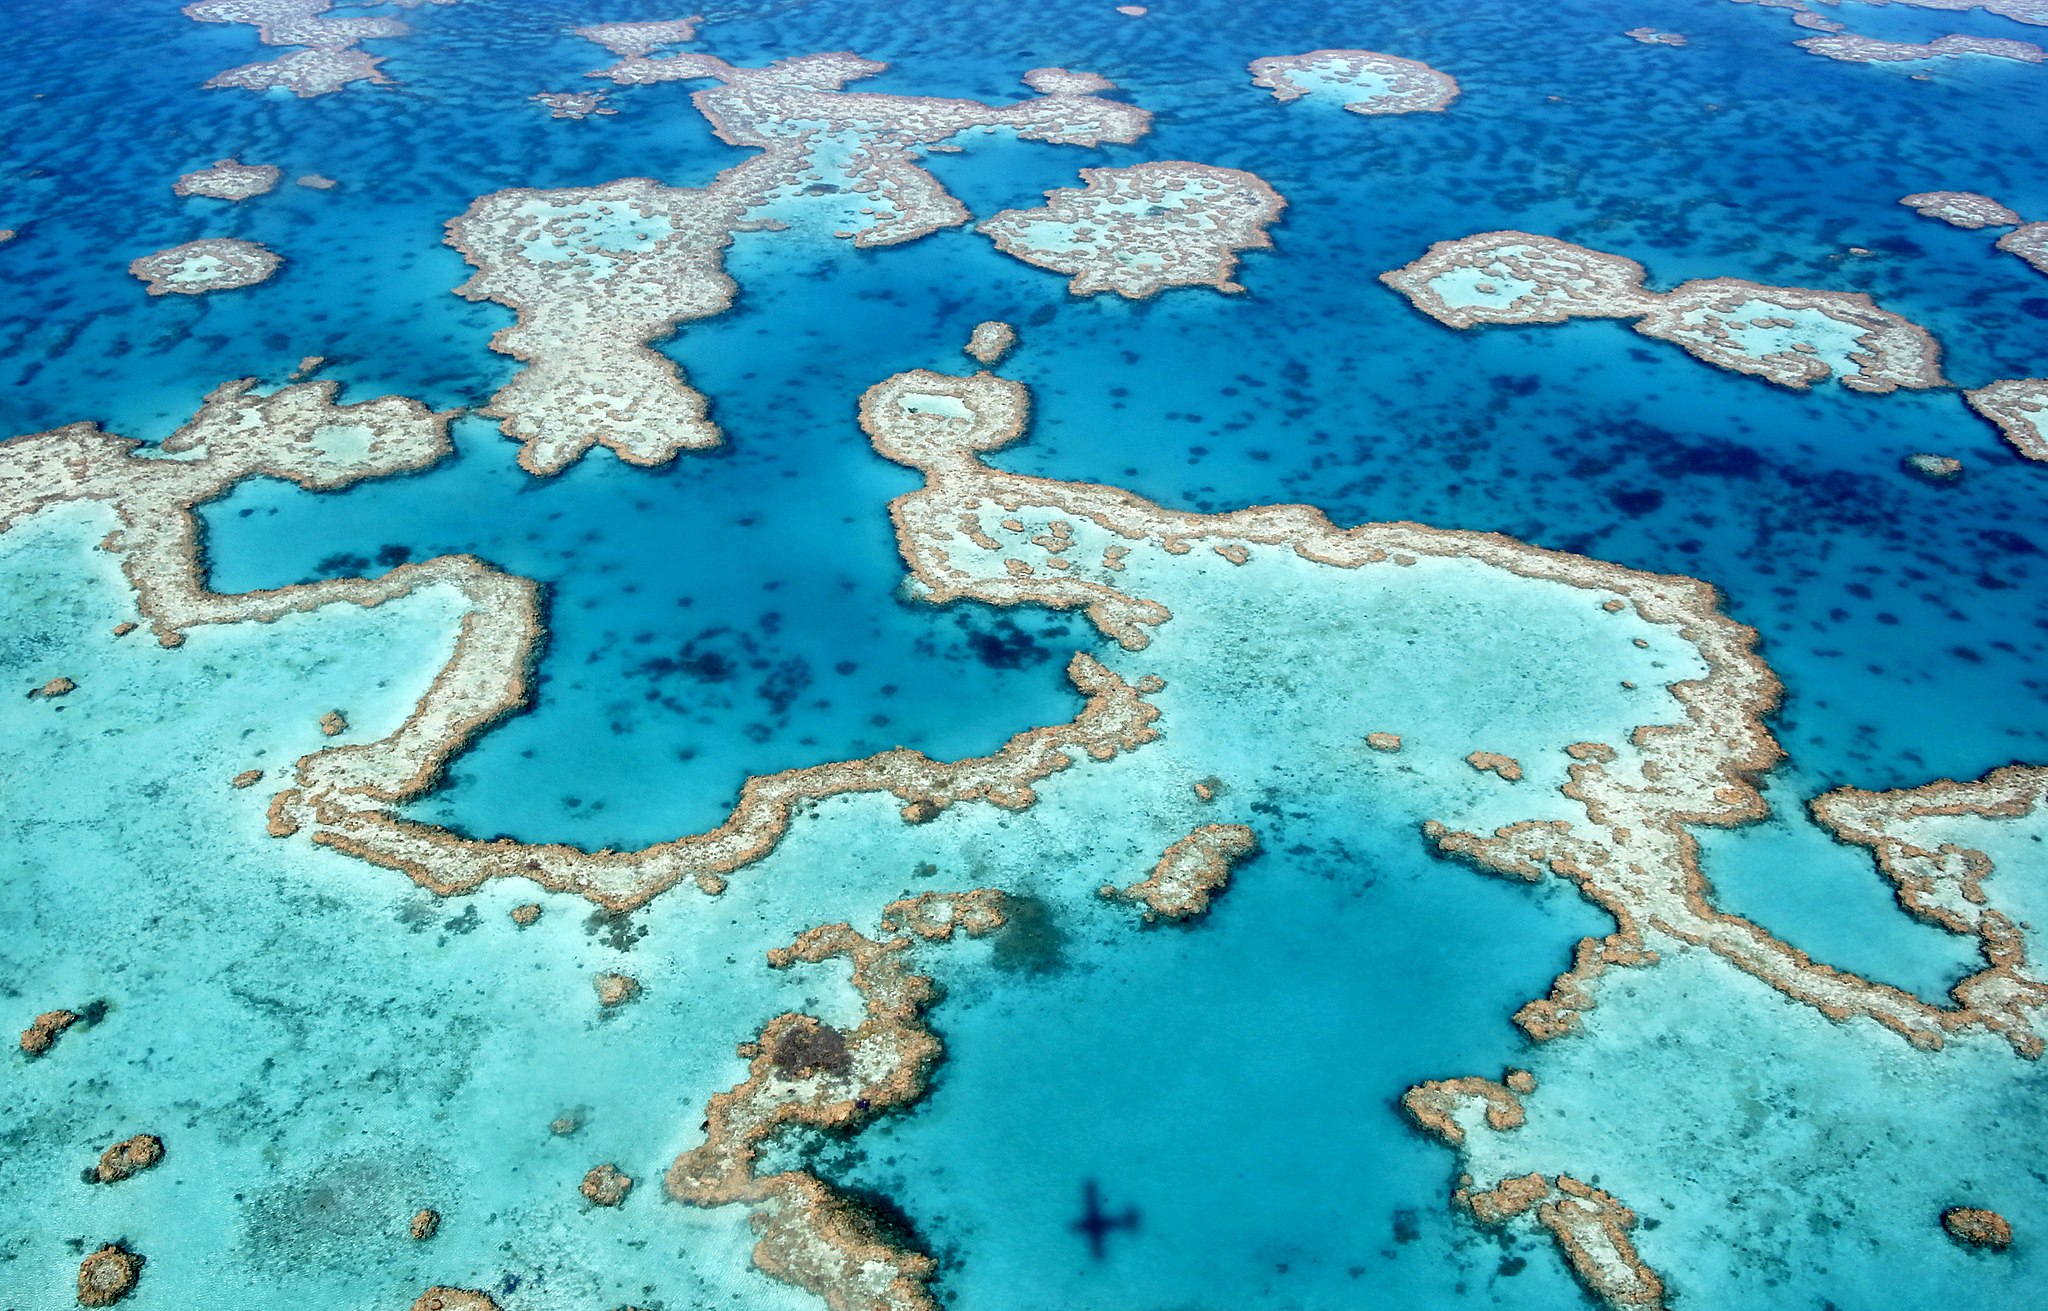 The Great Barrier Reef, seen from a scenic flight near Airlie beach, Queensland, October 21, 2018 (by Ayanadak123, CCBY-SA 4.0 via Wikimedia).